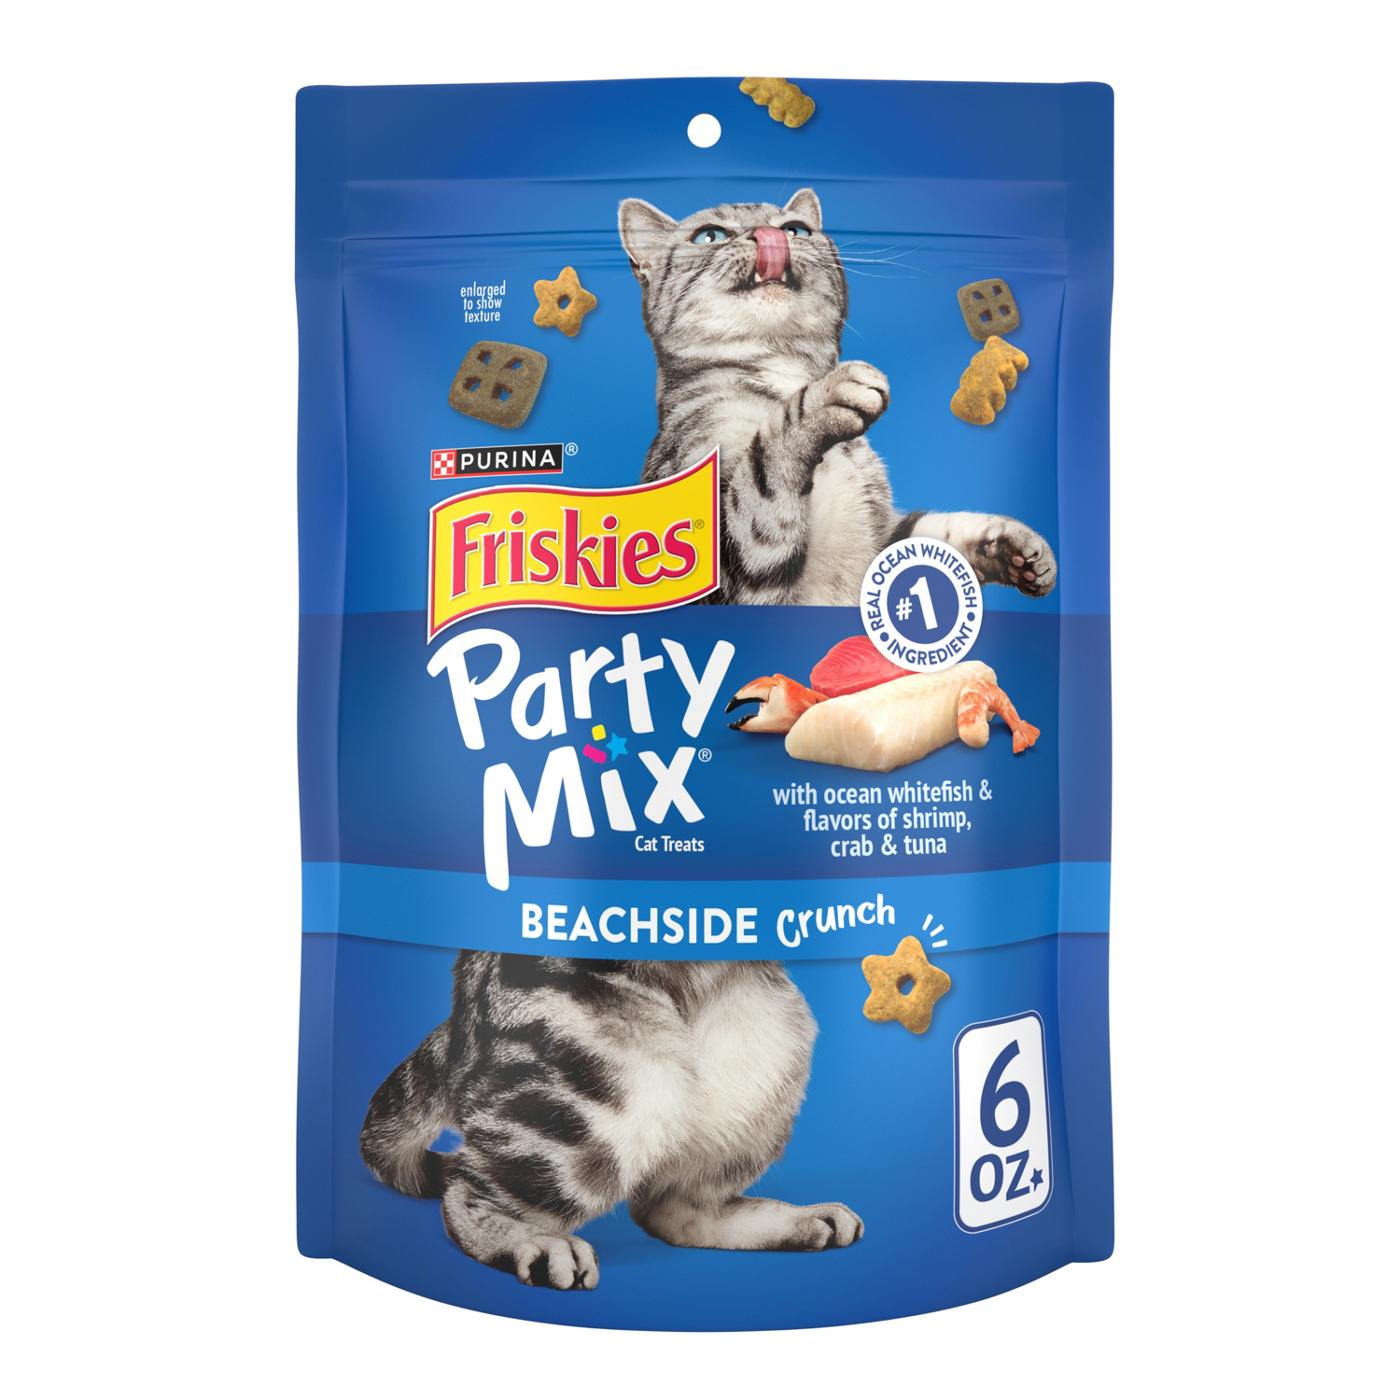 Friskies Purina Friskies Made in USA Facilities Cat Treats, Party Mix Beachside Crunch; image 1 of 3